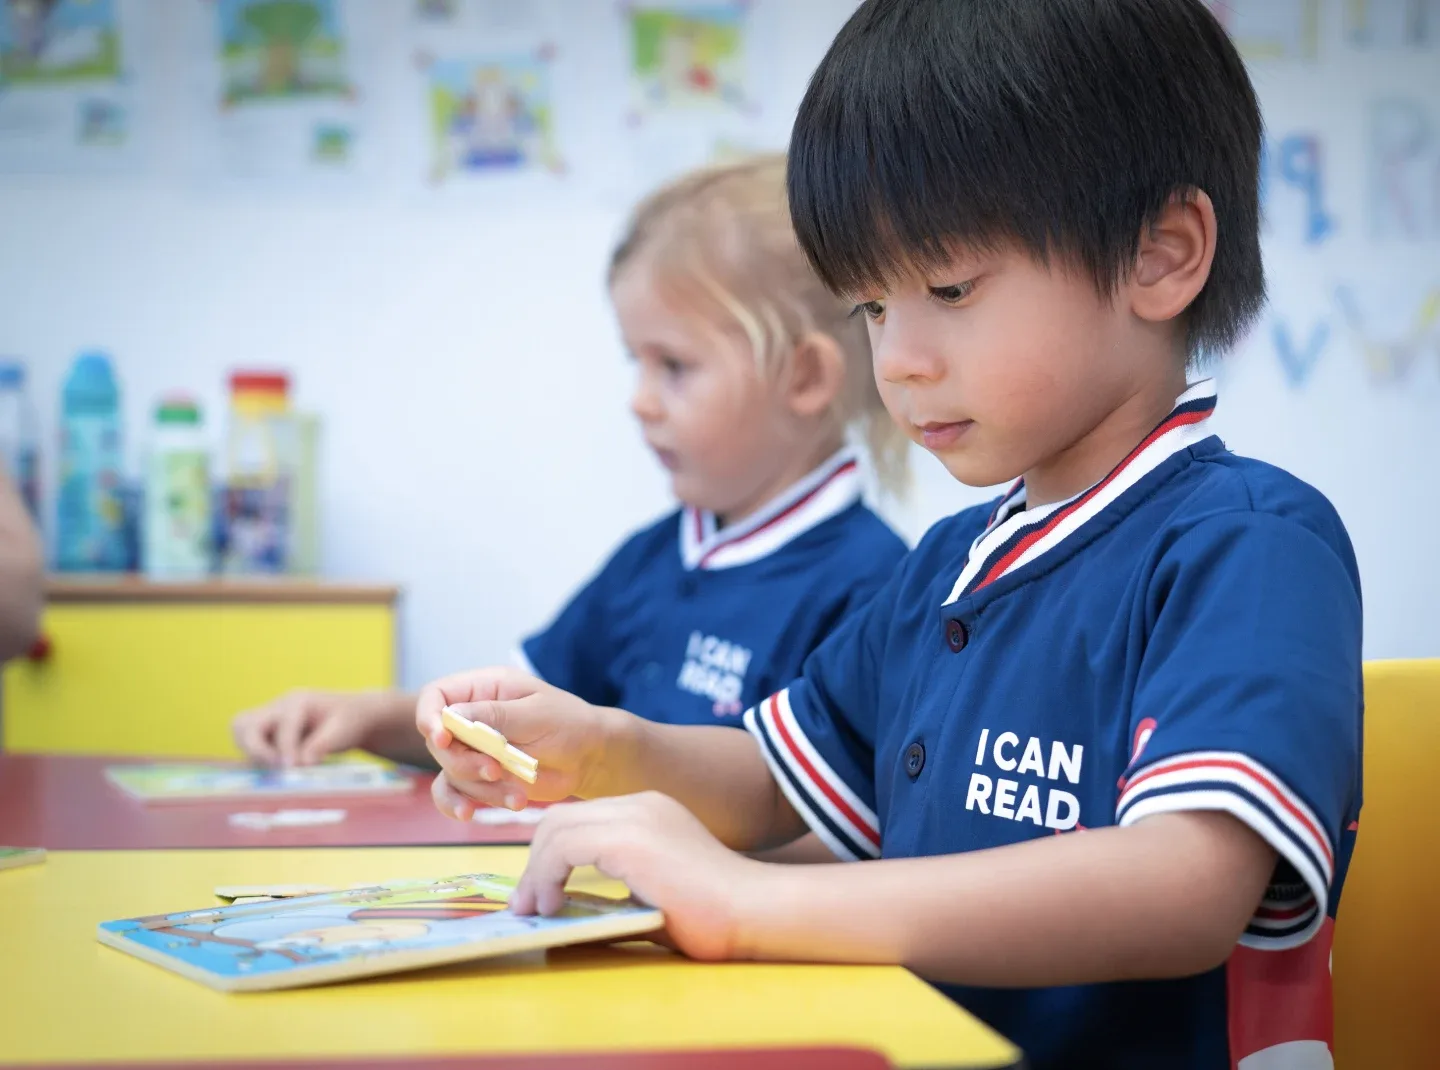 Developed by educational psychologists, the I Can Read Programme is student-centred, outcome-driven and taught by qualified ICR teachers.